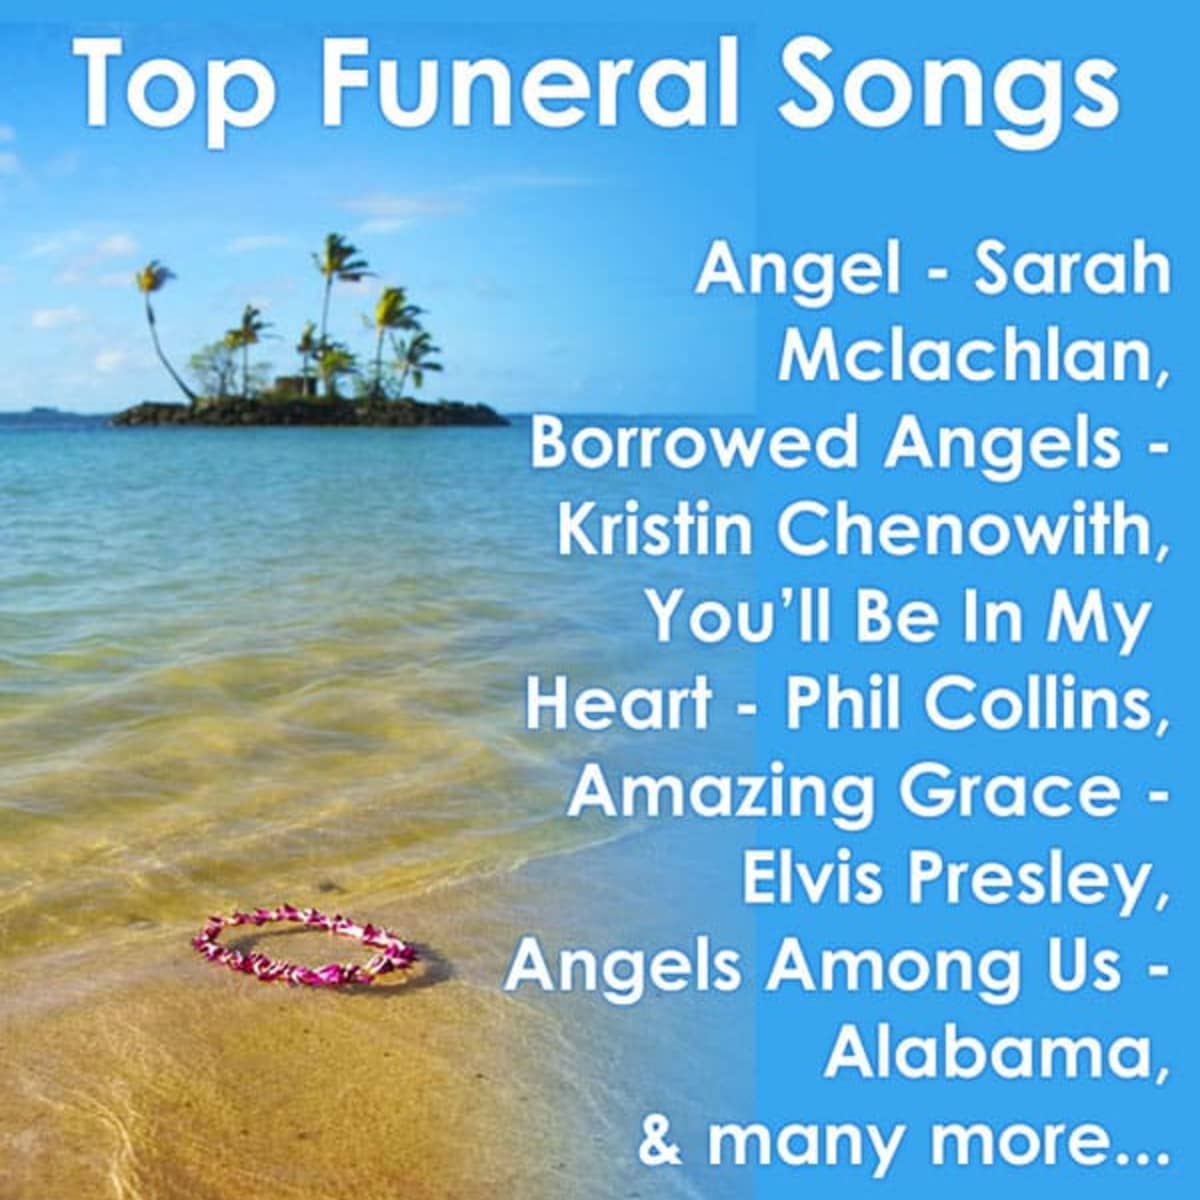 100 Uplifting Funeral Songs for Older Generation (2022) - HubPages